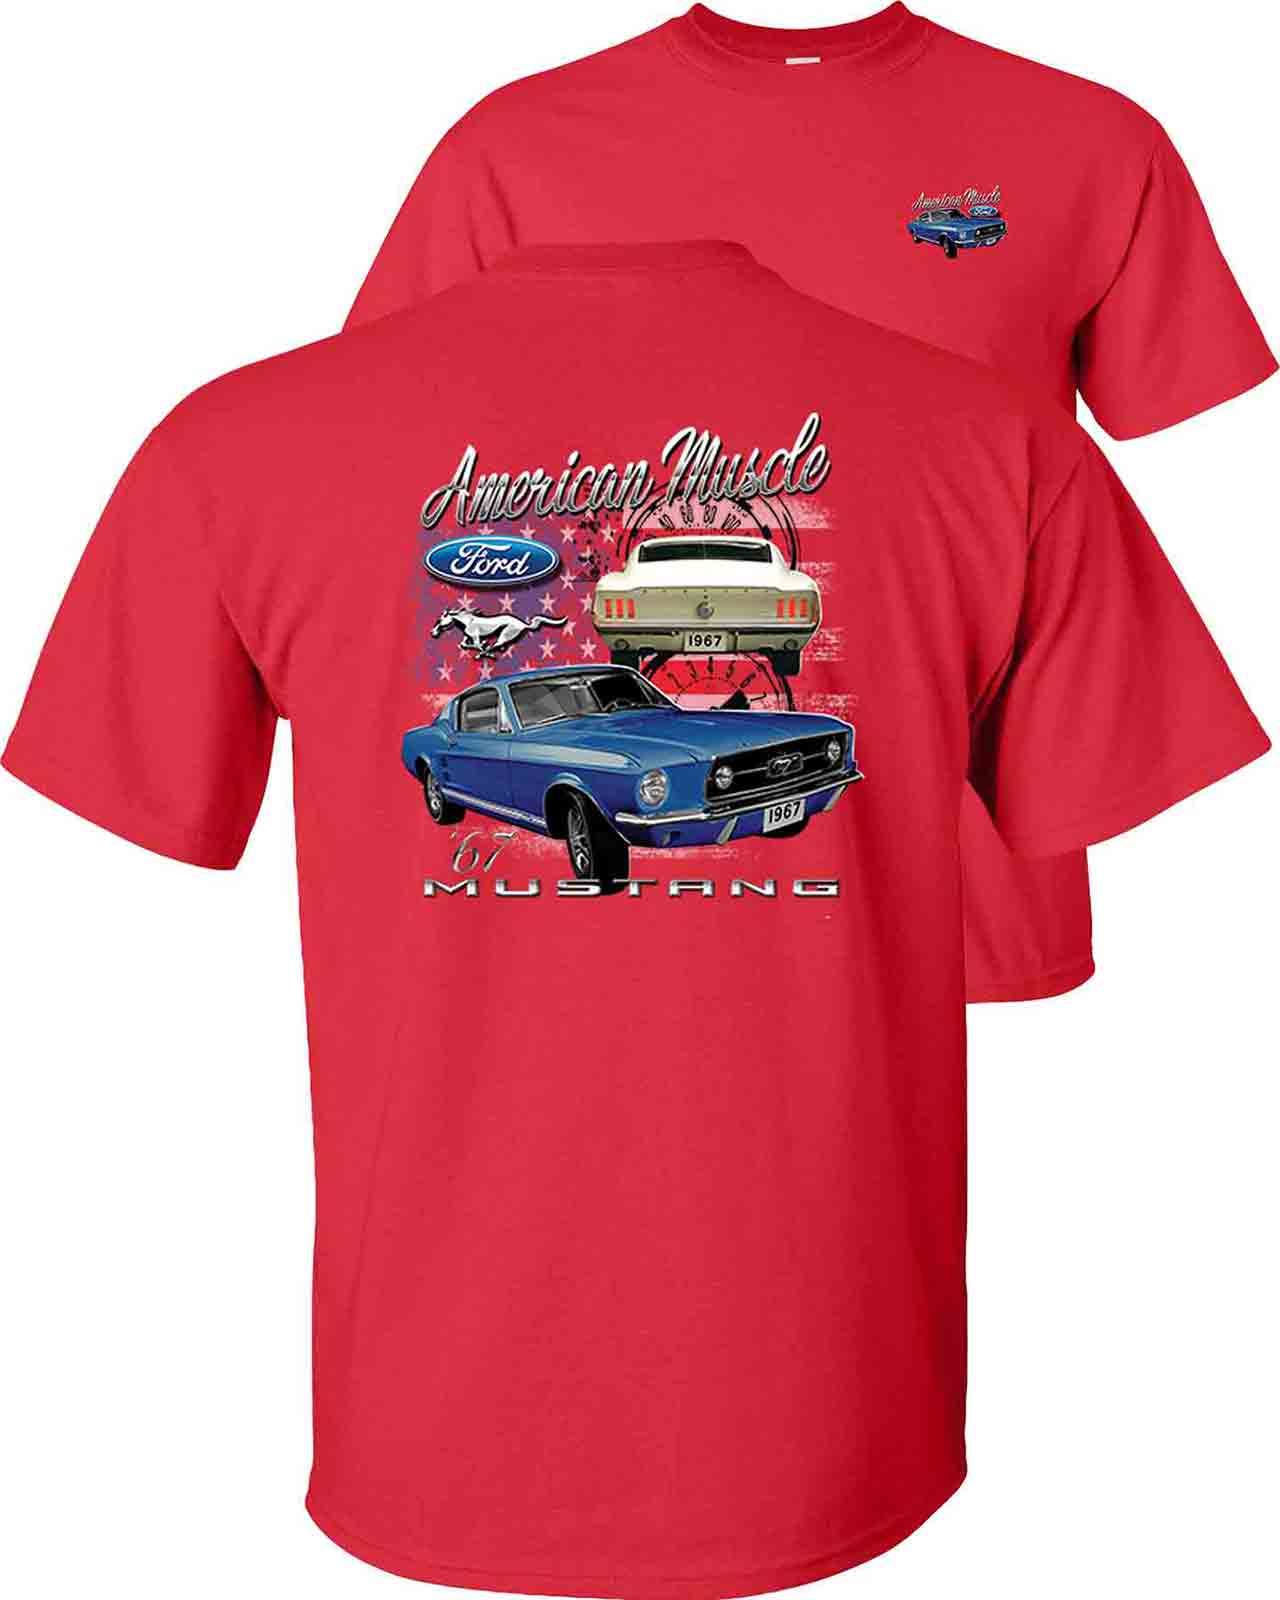 american-muscle-67-mustang-ford-t-shirt-red.jpg